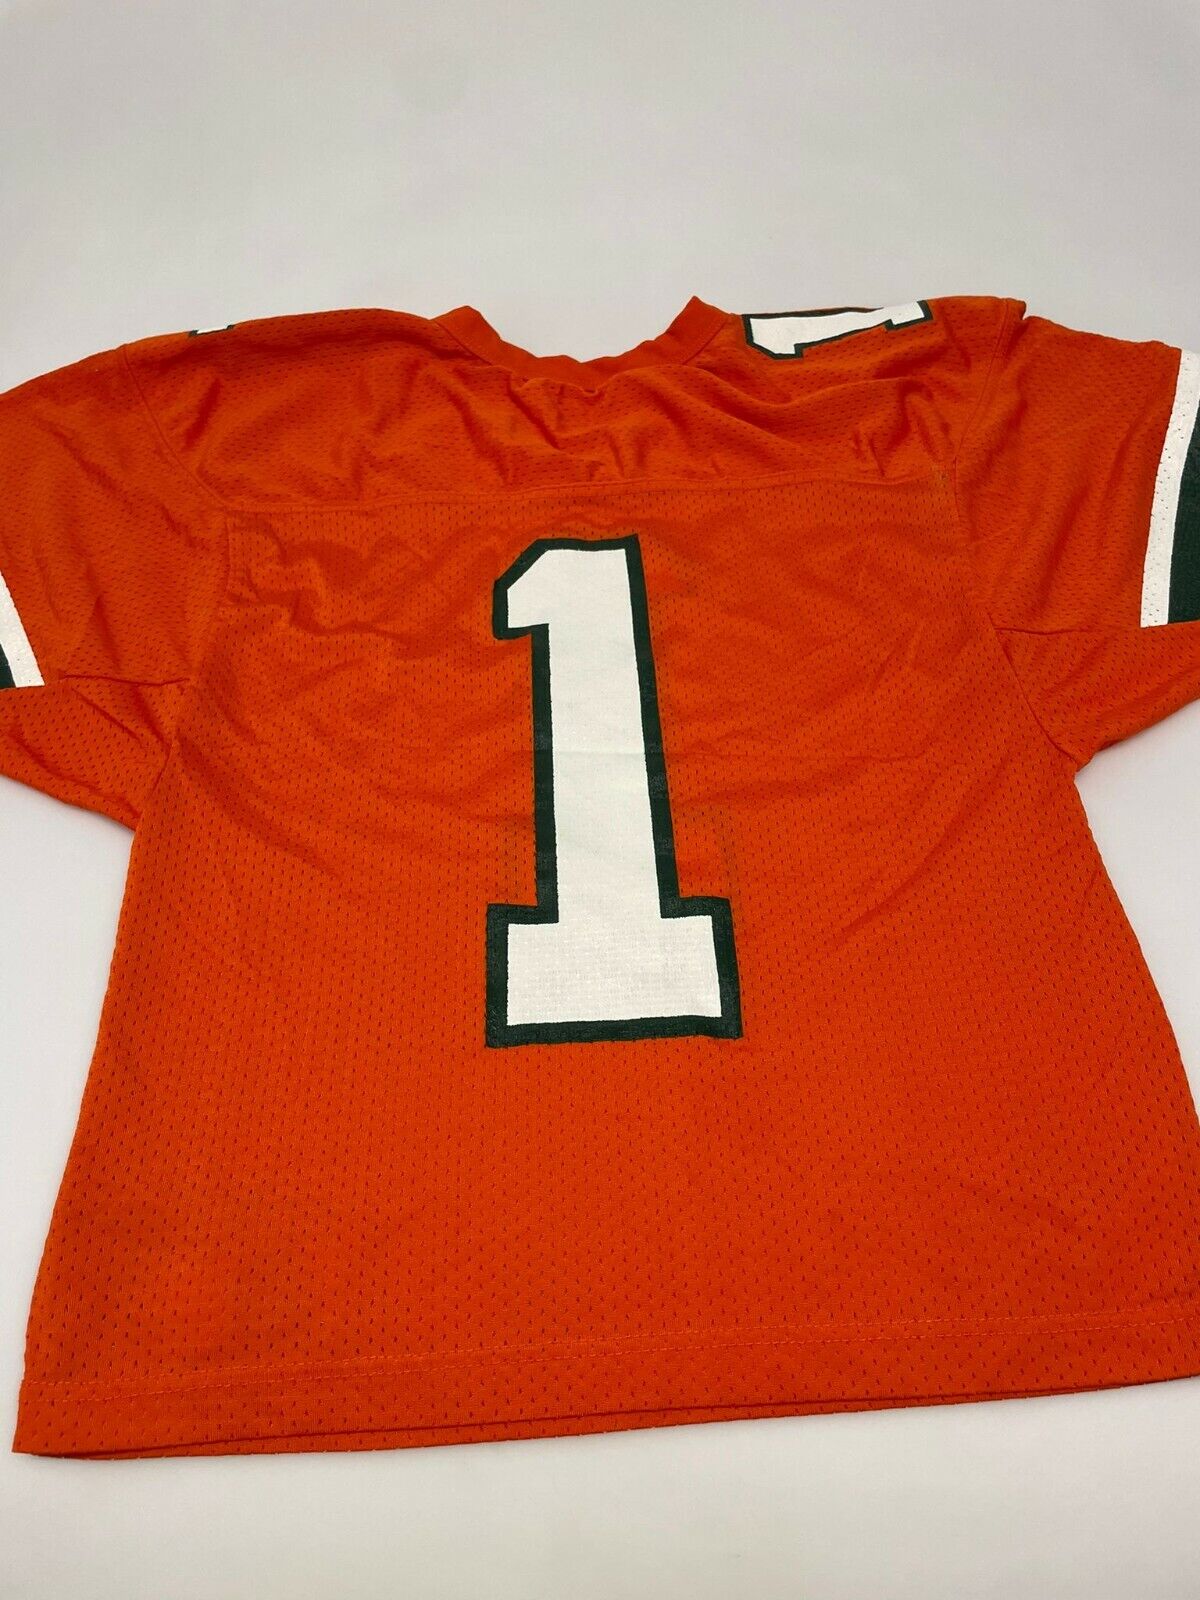 russell athletic football jersey Ranking TOP2 low-pricing #1 usa made vtg size m nylon